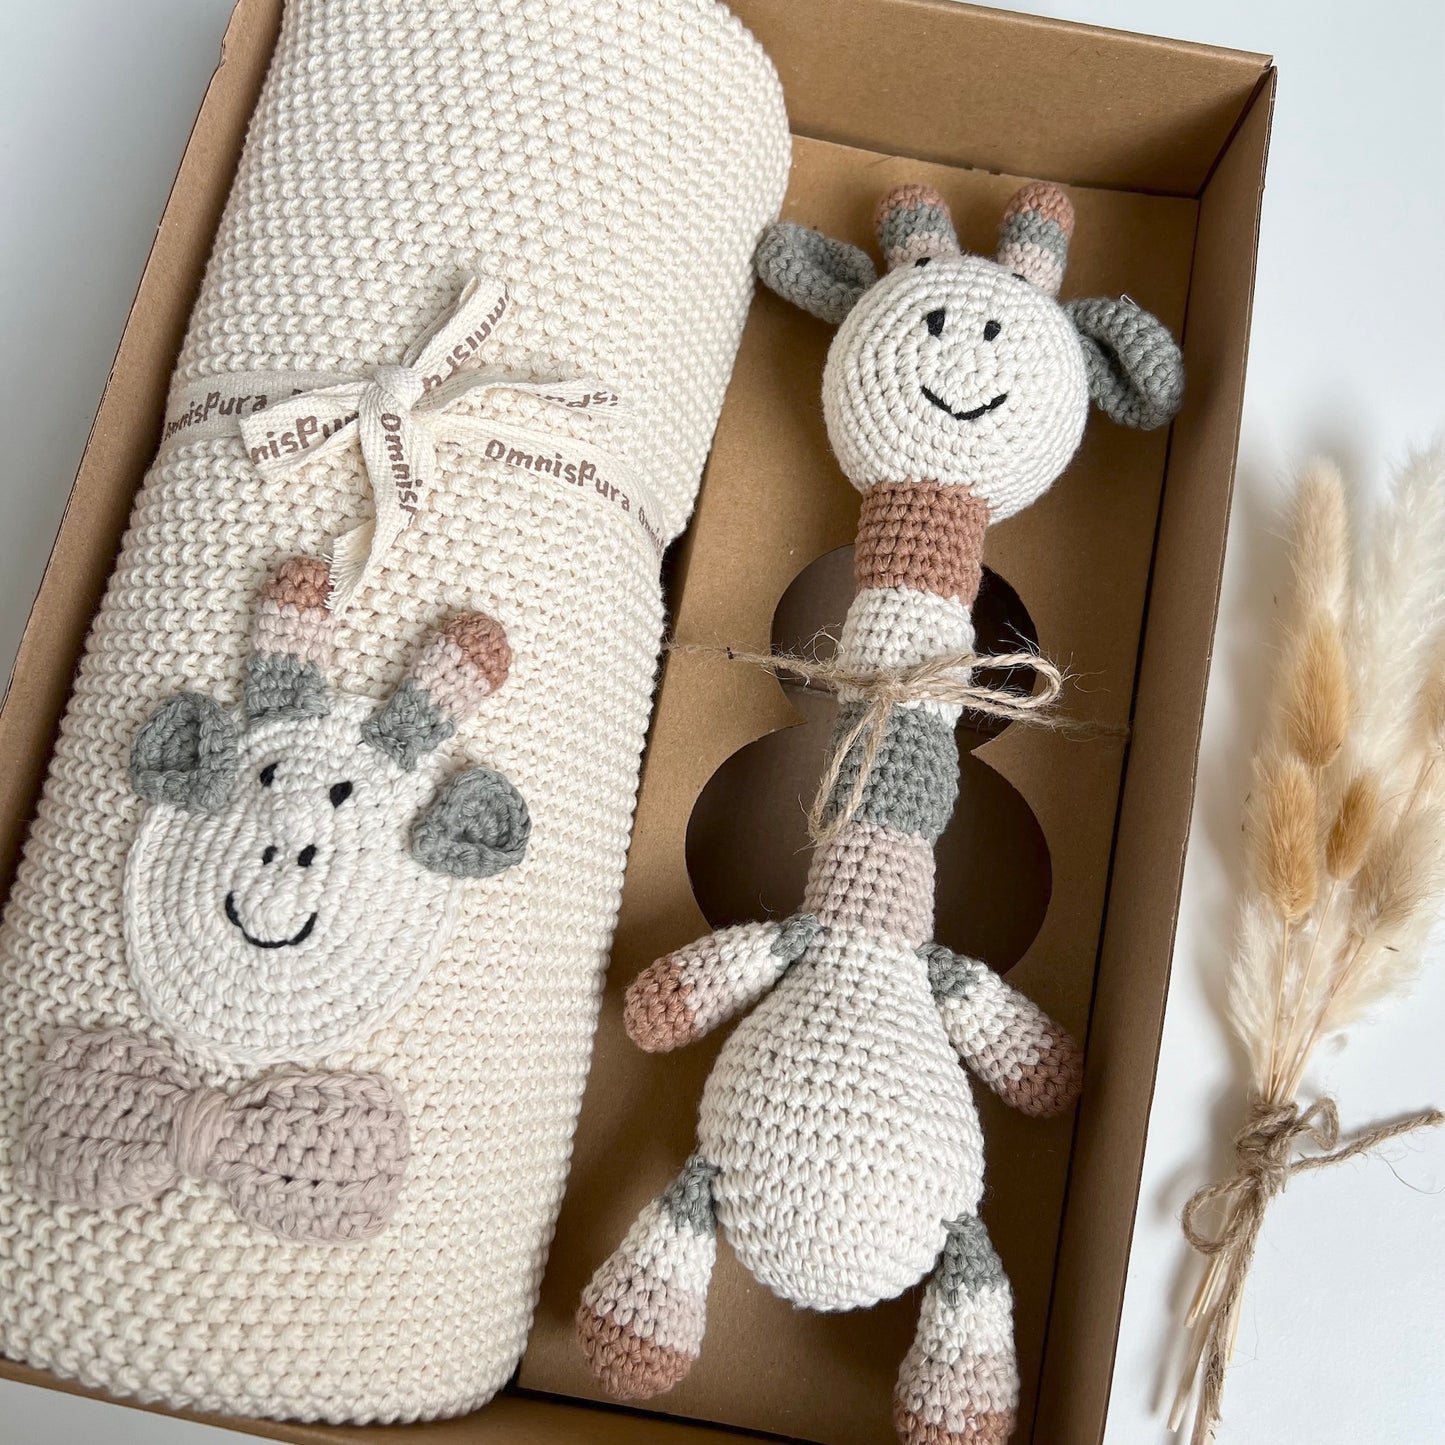 Organic Embroidered Blanket and Crochet Toy - Giraffe